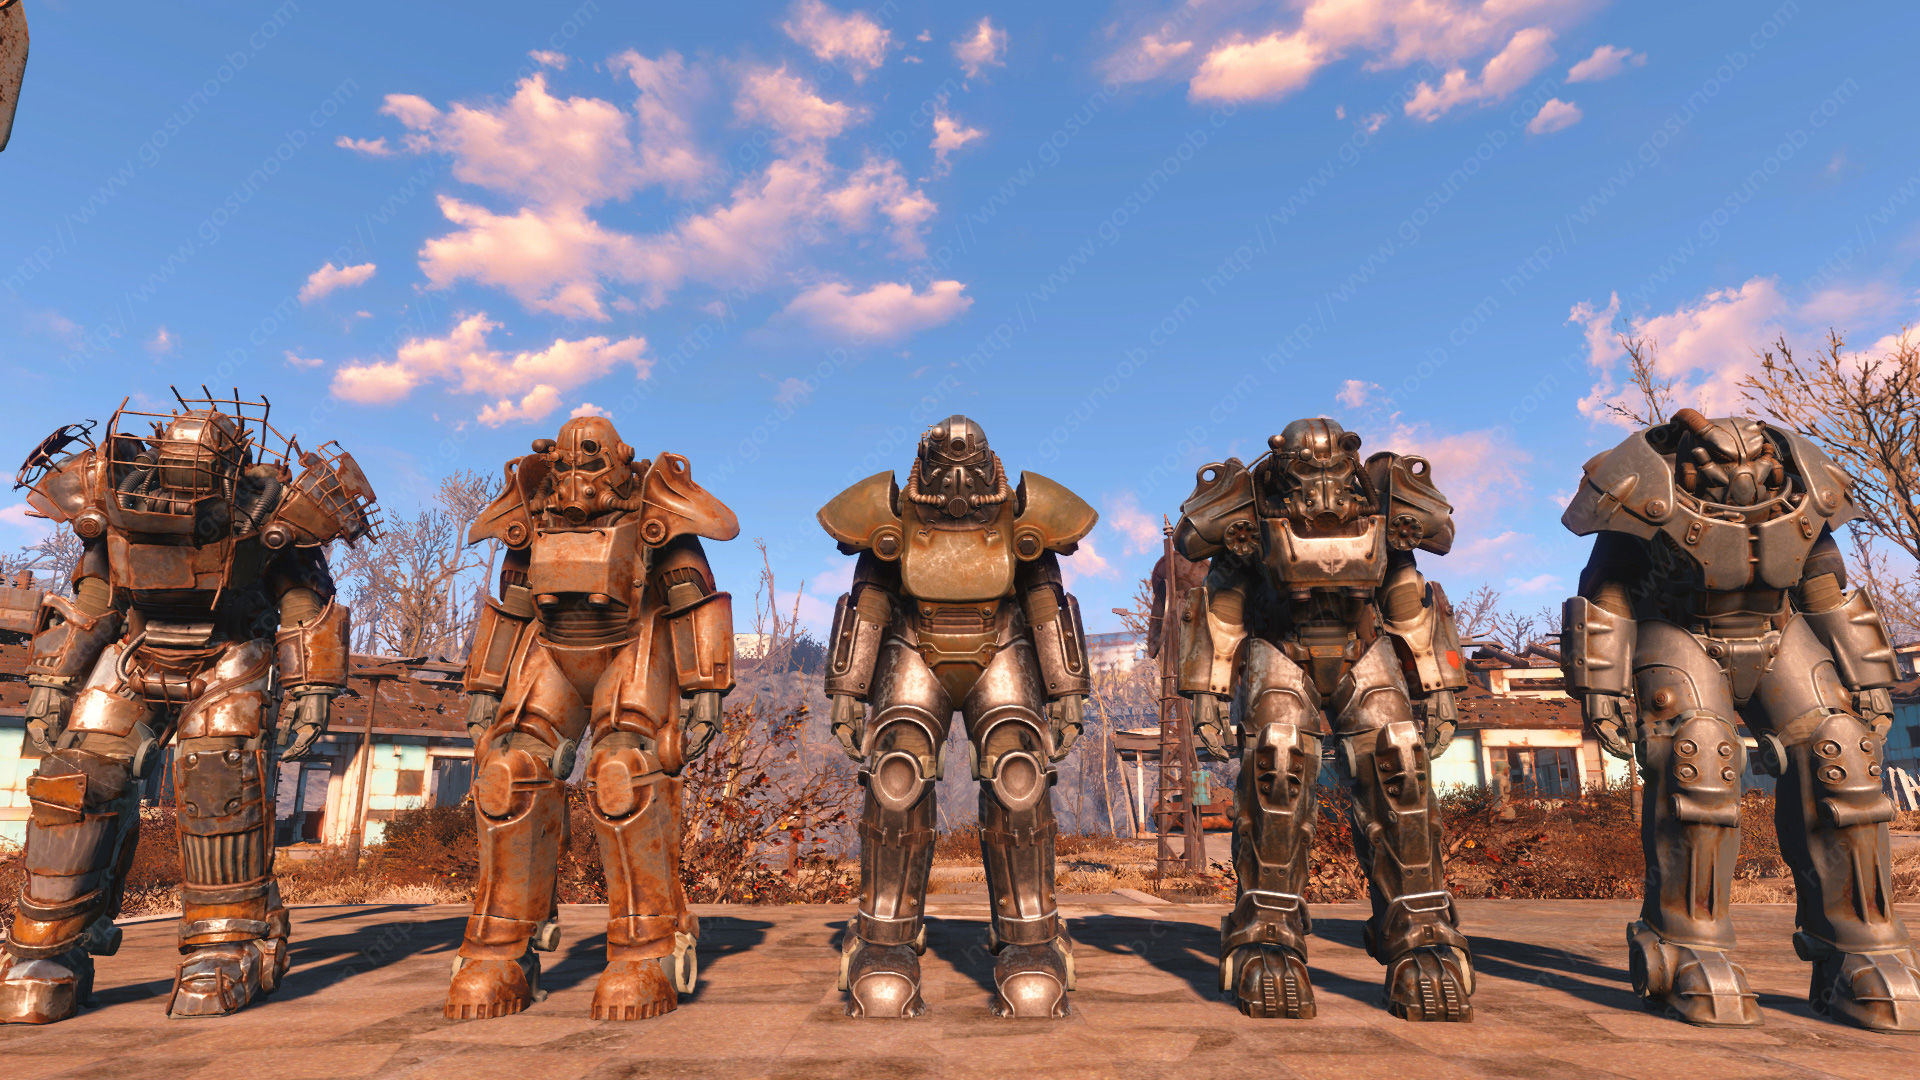 fallout 4 power armor locations